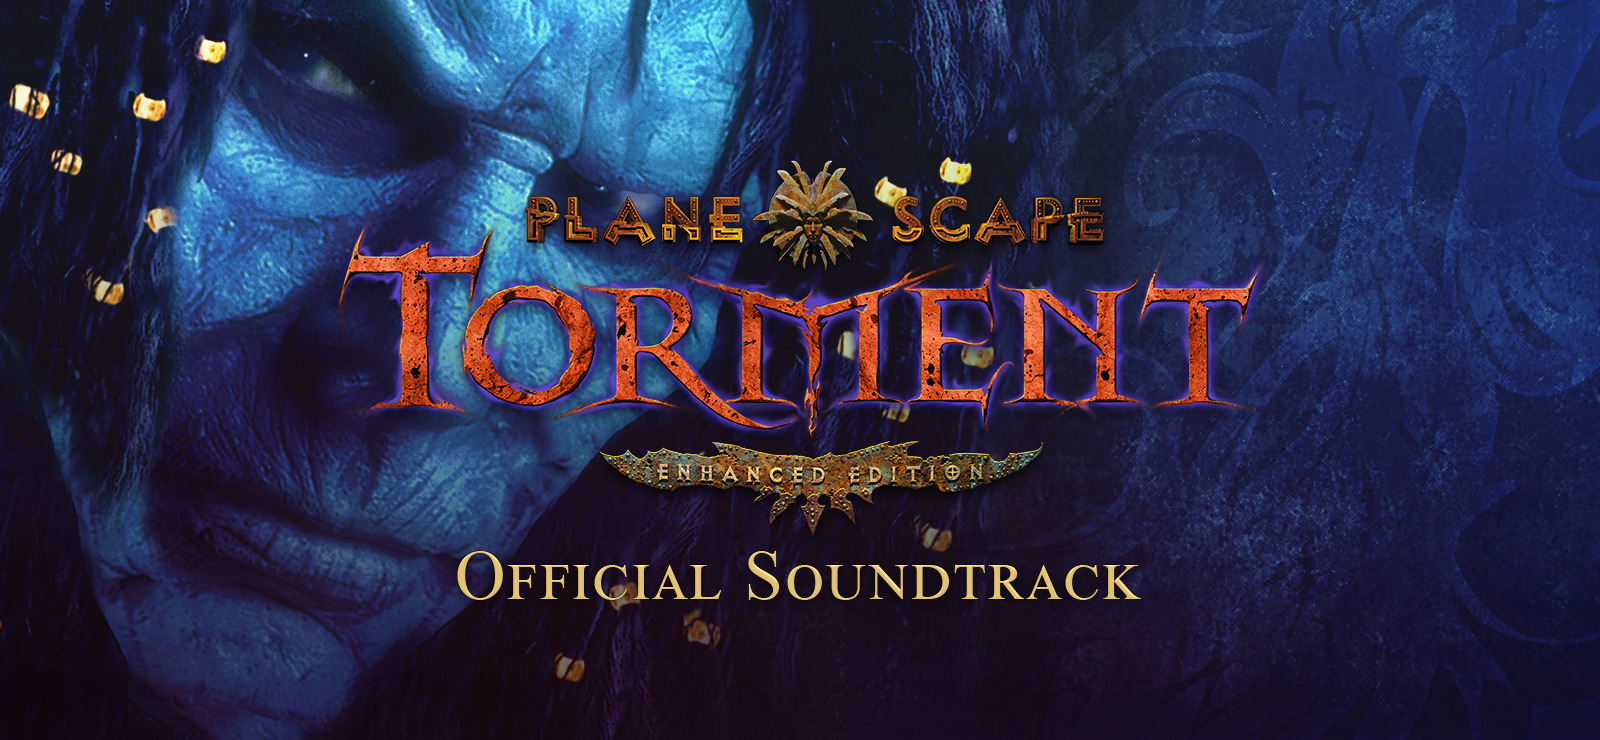 Soundtrack Enhanced Edition Torment: Planescape: Official on